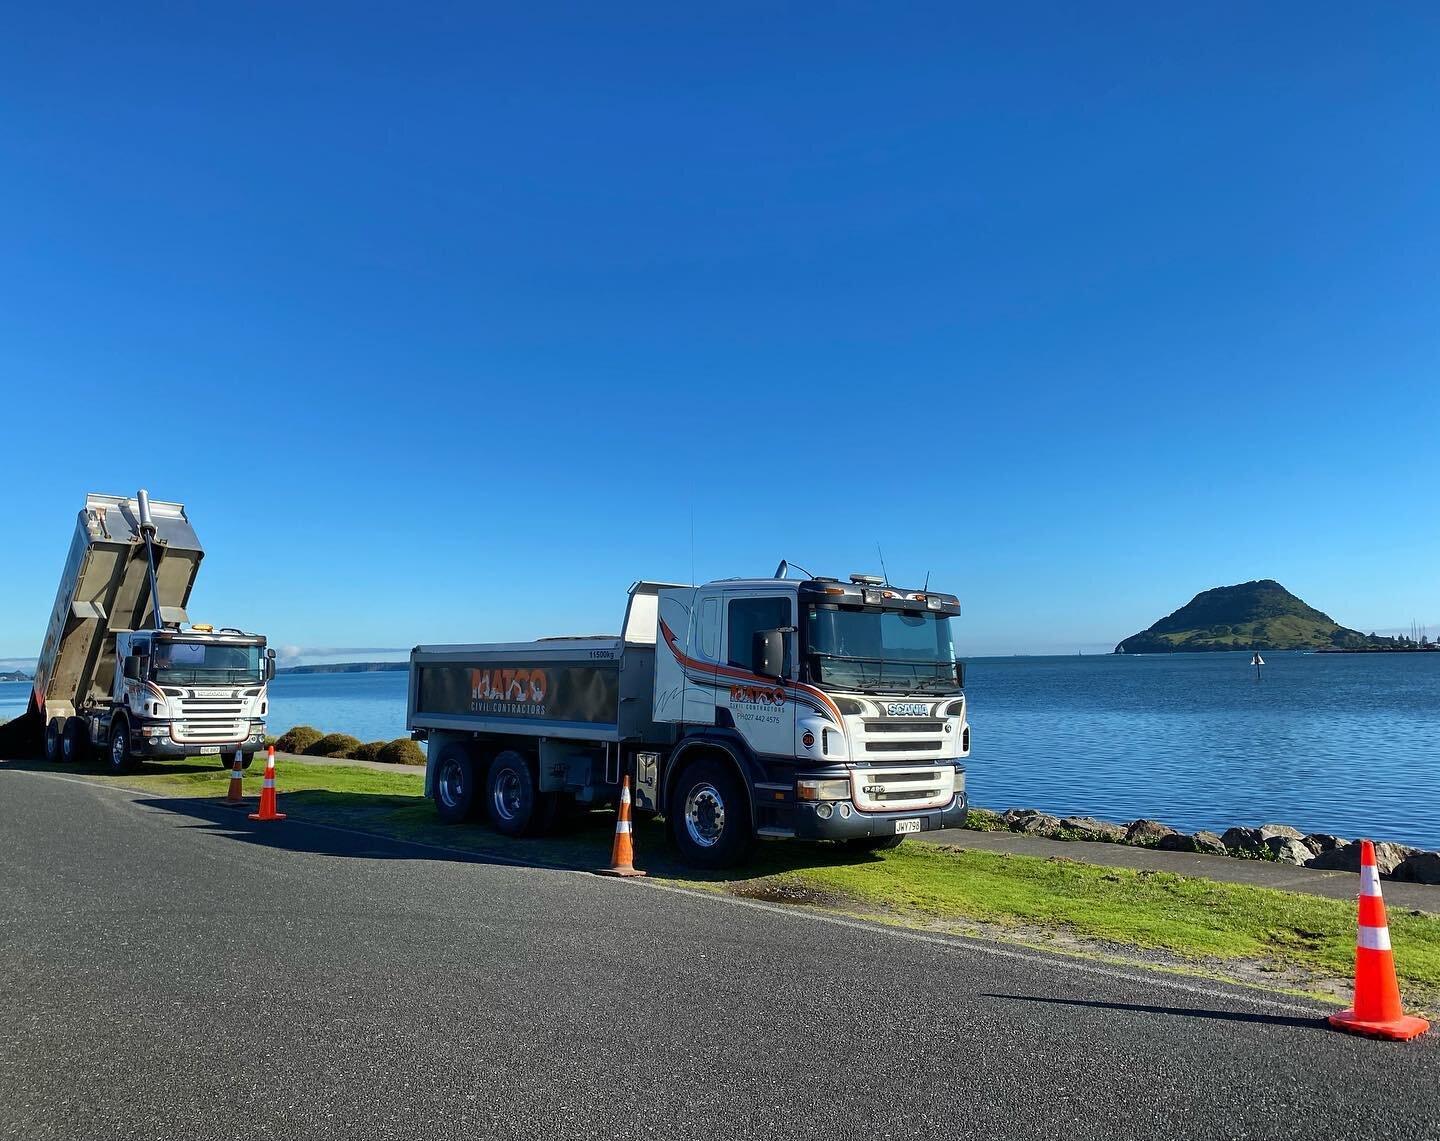 Beautiful day in the bay today (we&rsquo;re sick of the rain) our Truckies getting it done in a picturesque spot today. #matcocivil #scanianz